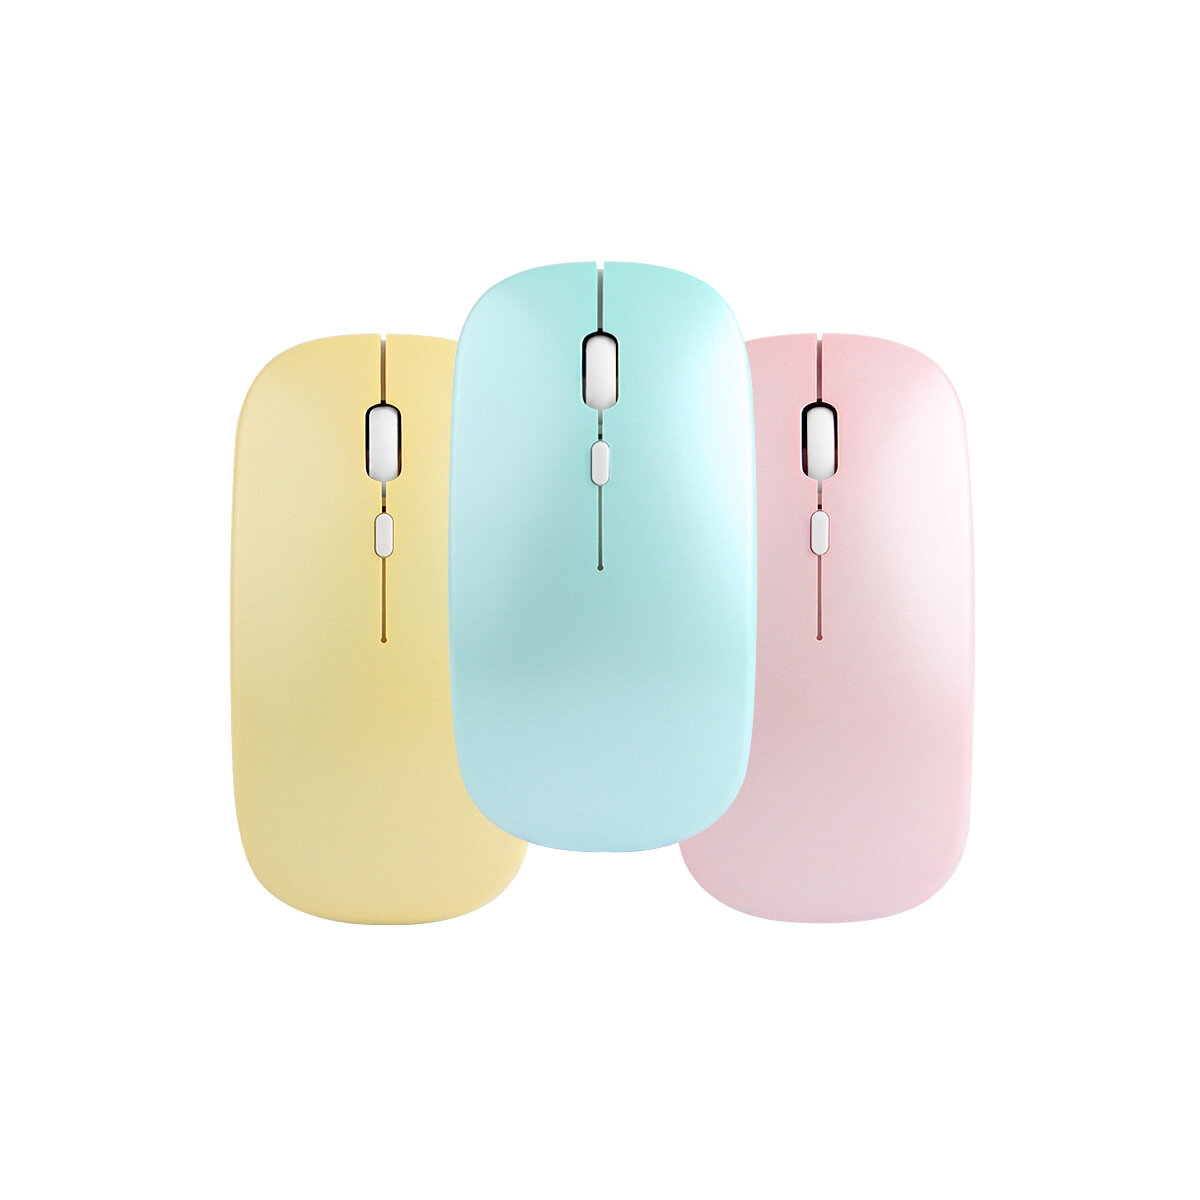 Triple Mode Rechargeable Mouse 2.4GHz bluetooth Wired 1600DPI Silent Macarone Mute Mice for Laptop P